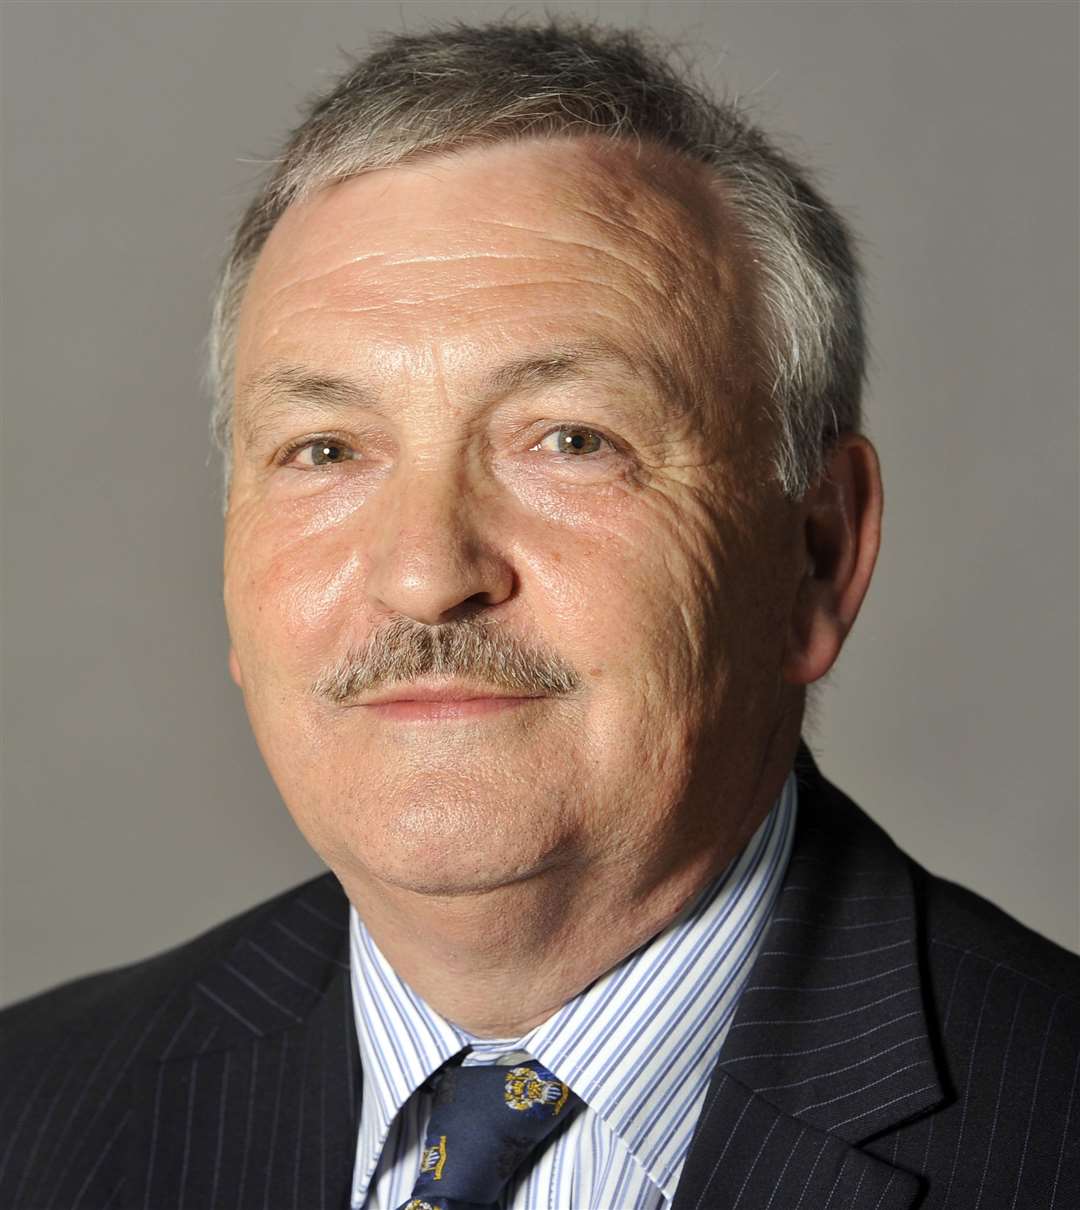 Medway Council leader Alan Jarrett believes city status for Medway will bring certain 'intangible benefits'